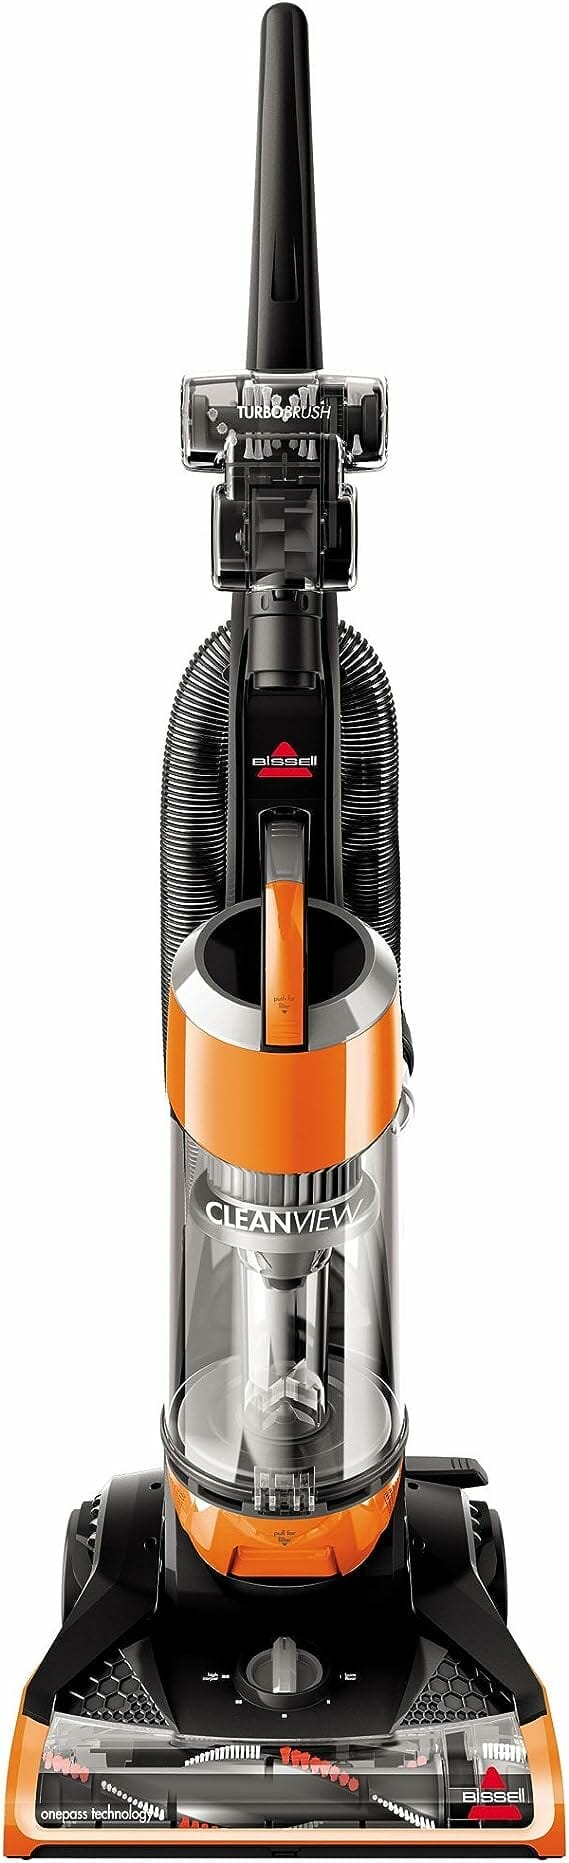 The 7 Best Vacuum Cleaners Under $100 2